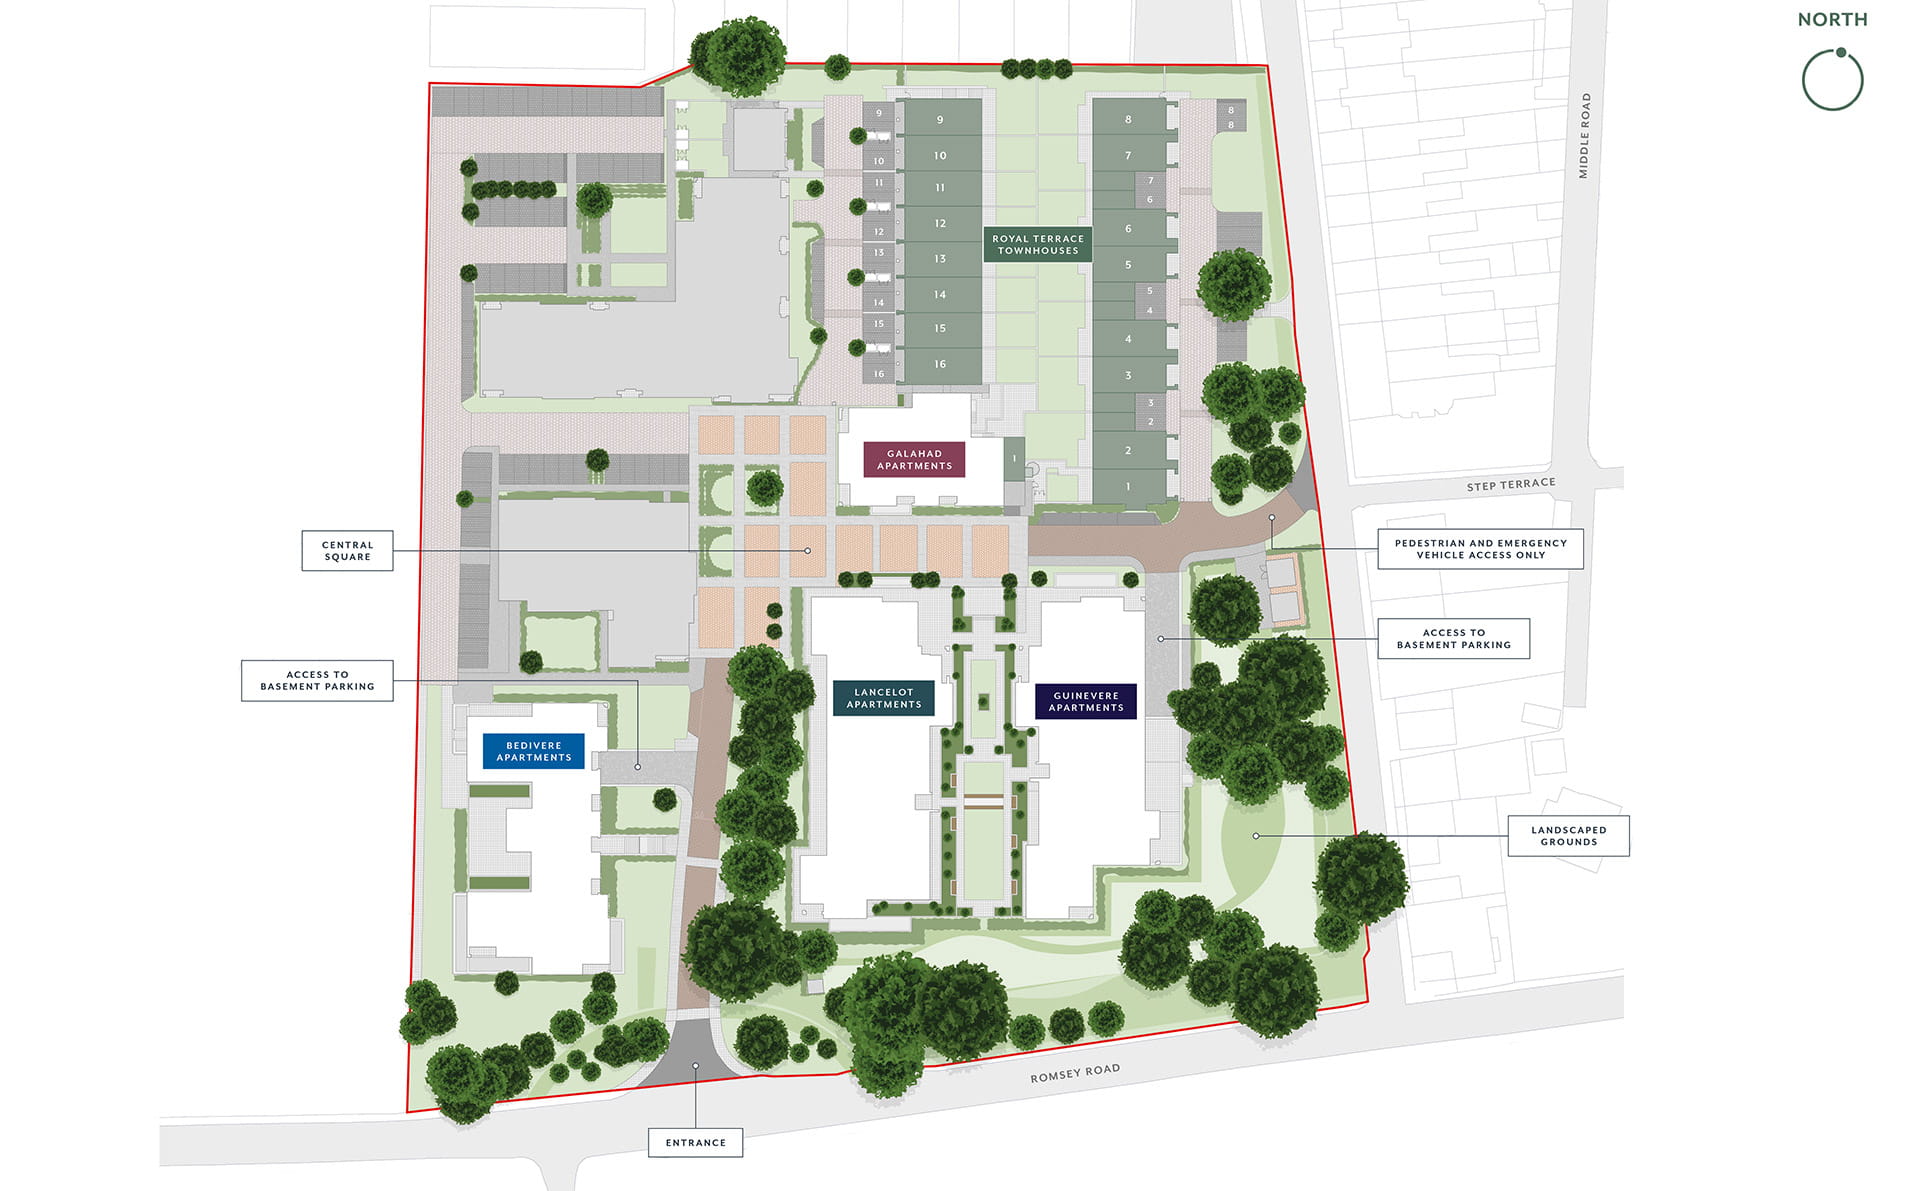 Image of site plan at Knights Quarter